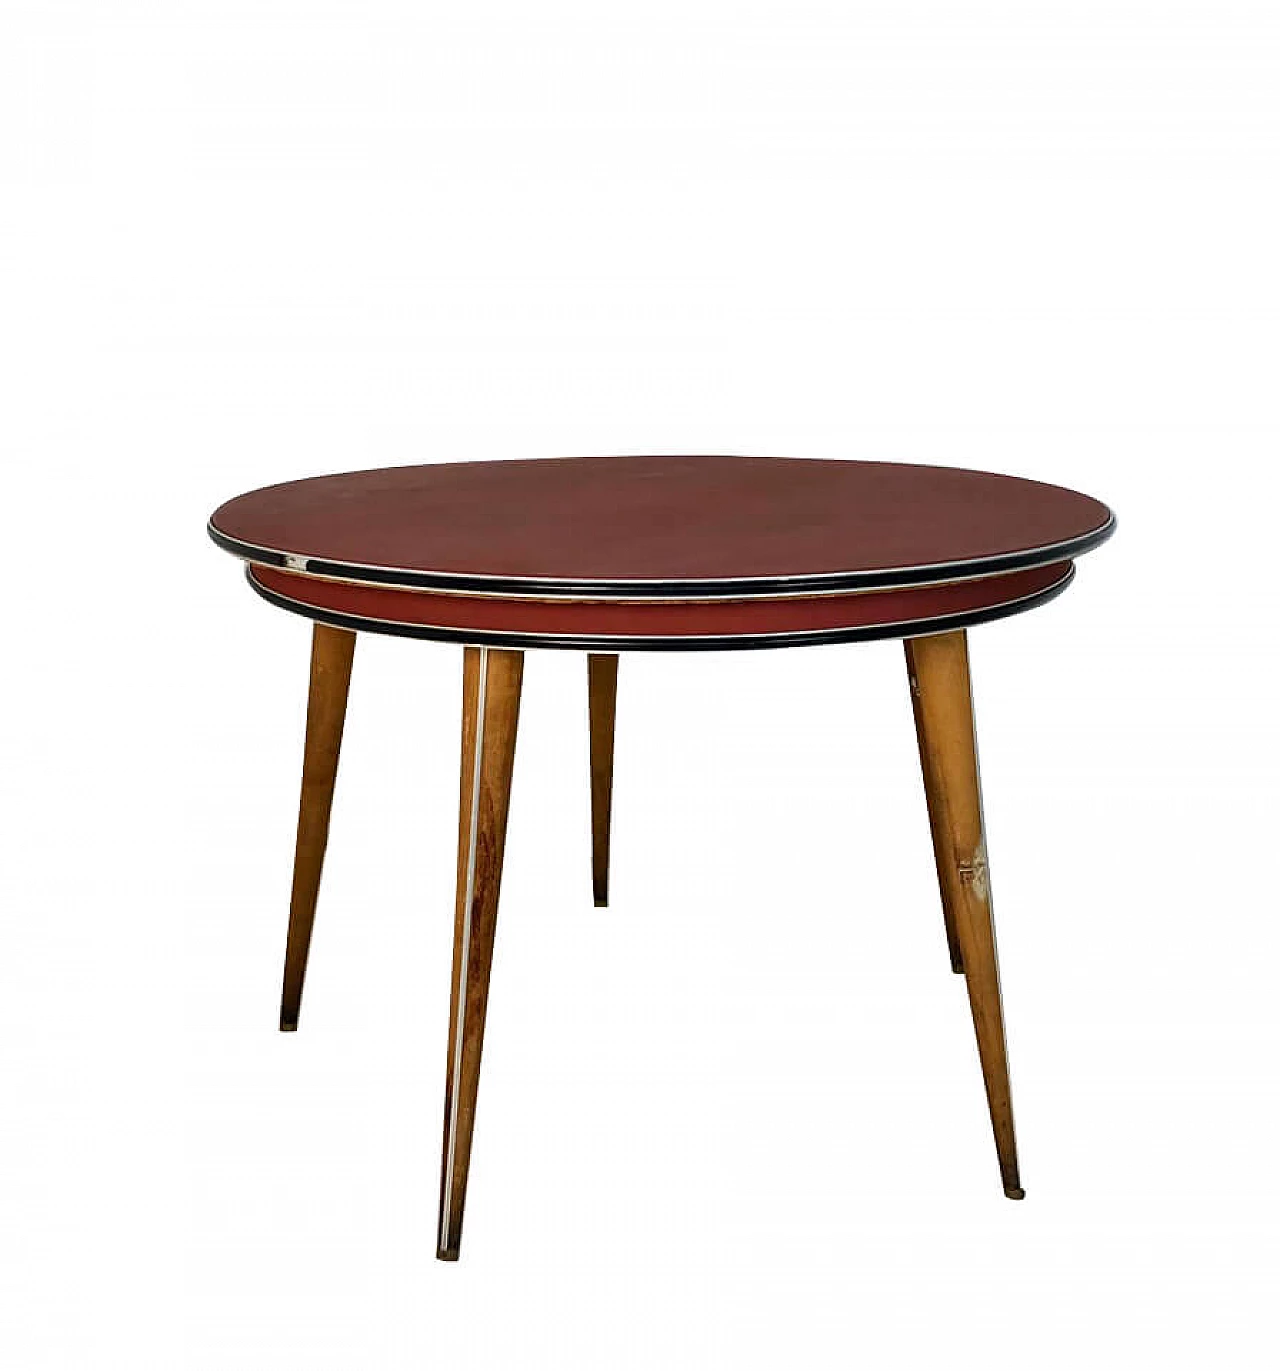 Round dining table by Umberto Mascagni, 1950s 1099865